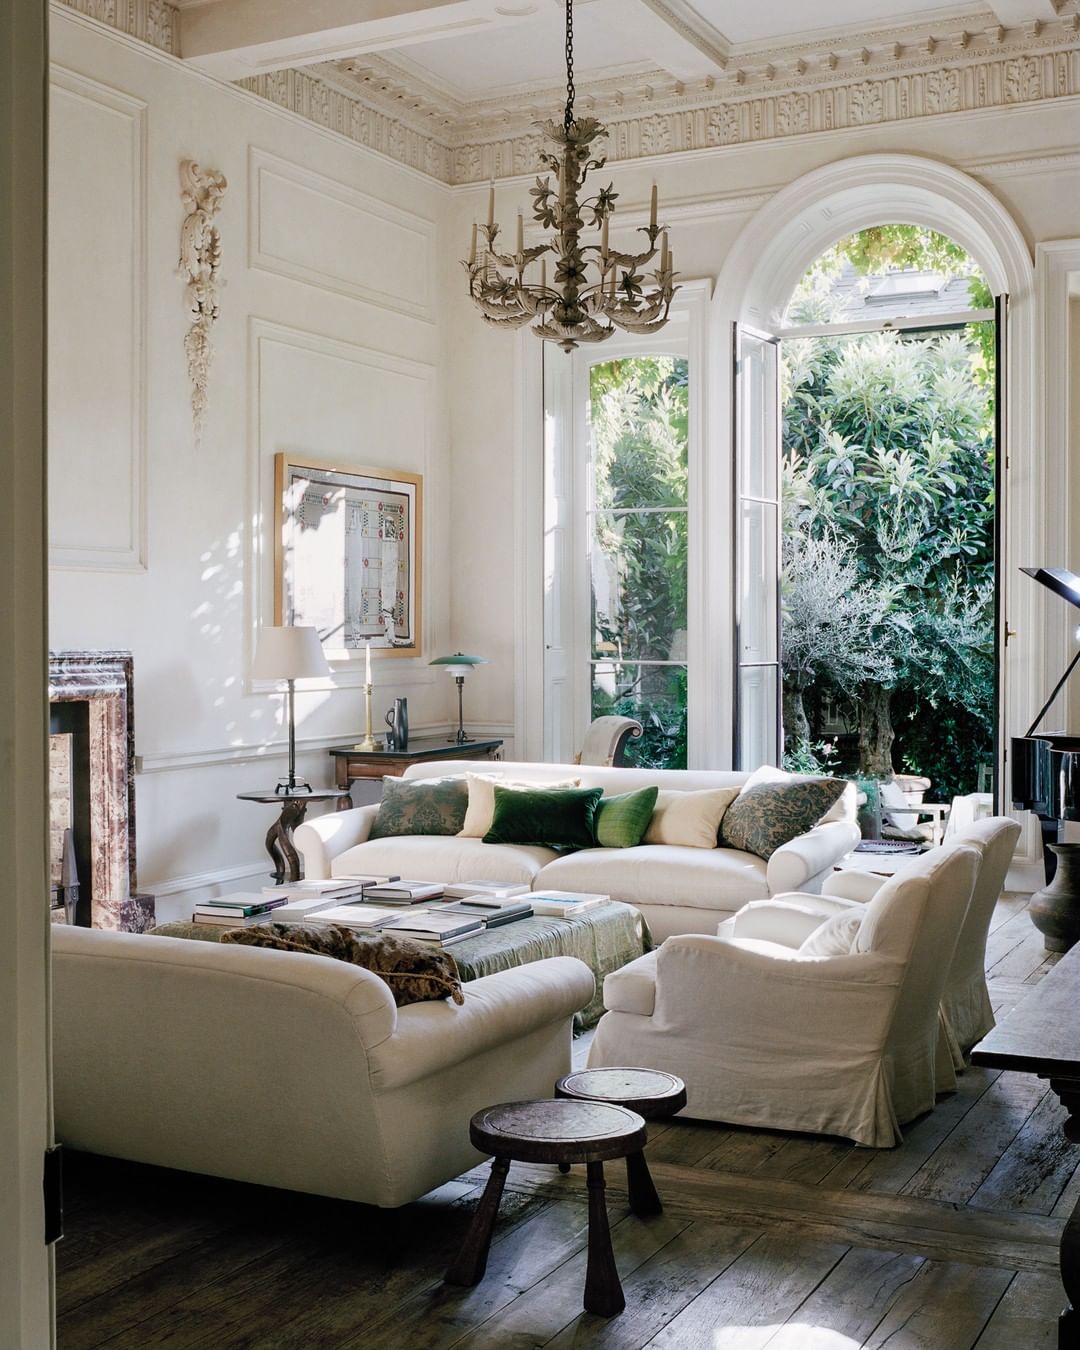 Décor Inspiration: The Breathtaking Rooms @rizzolibooks